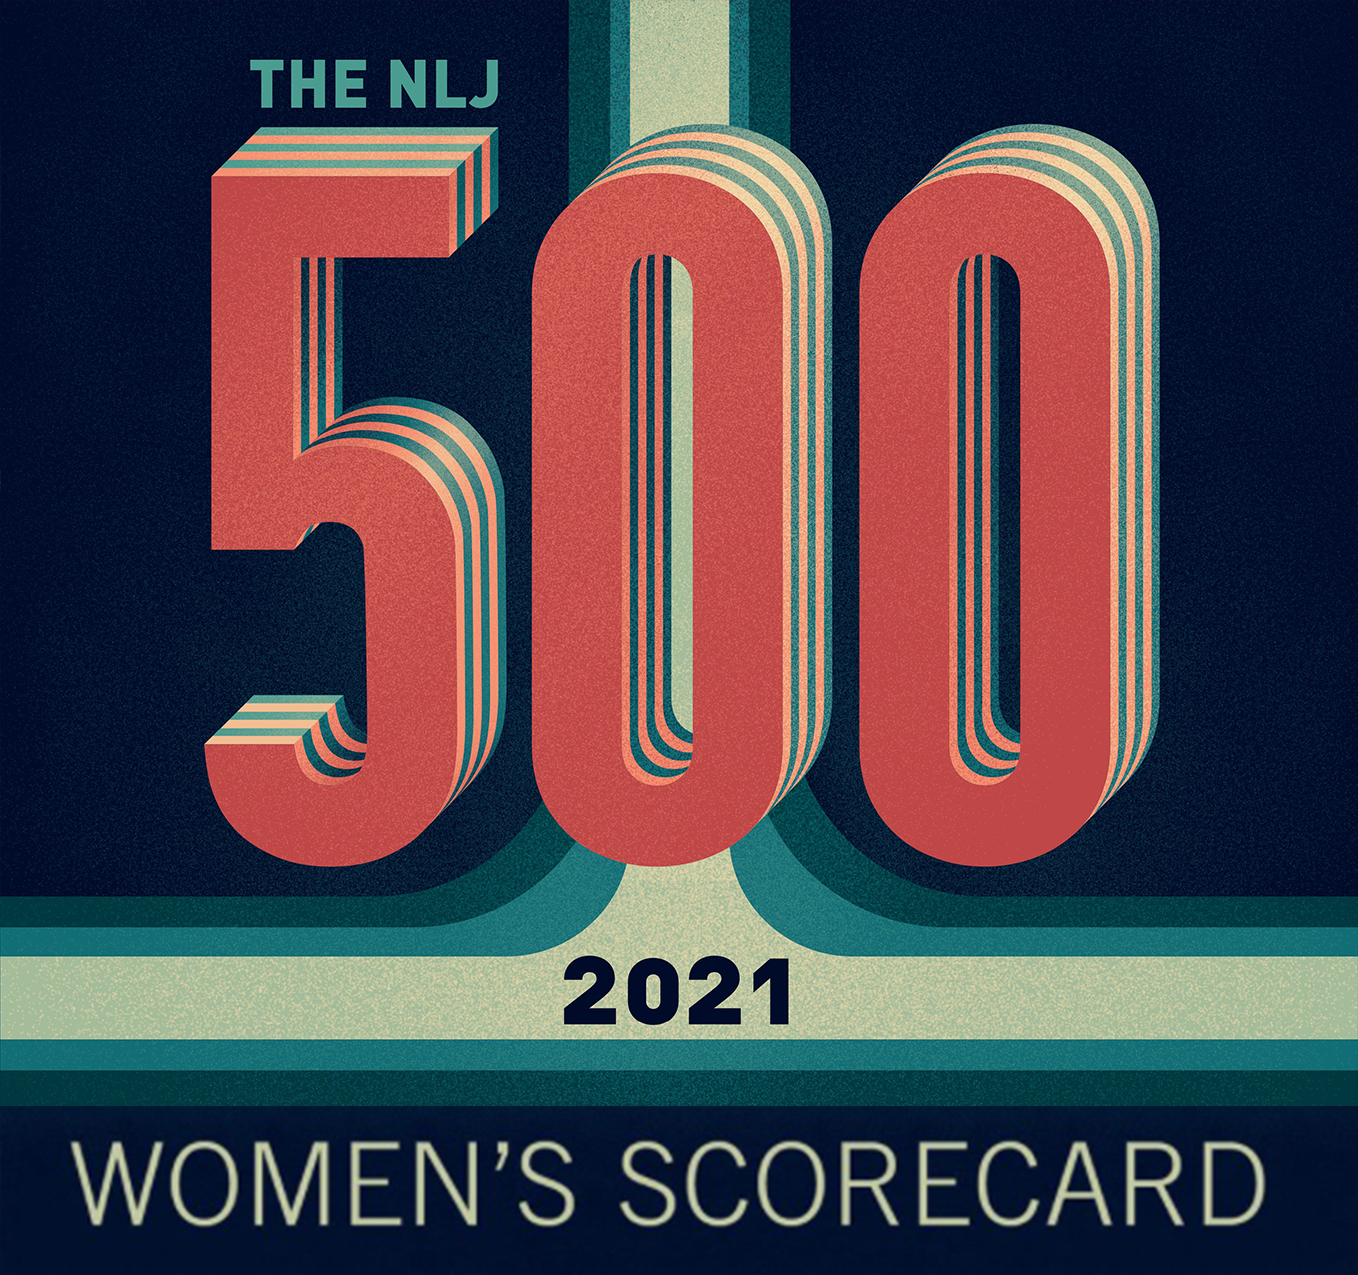 National Law Journal's Women's Scorecard 2021 image linking to the rankings